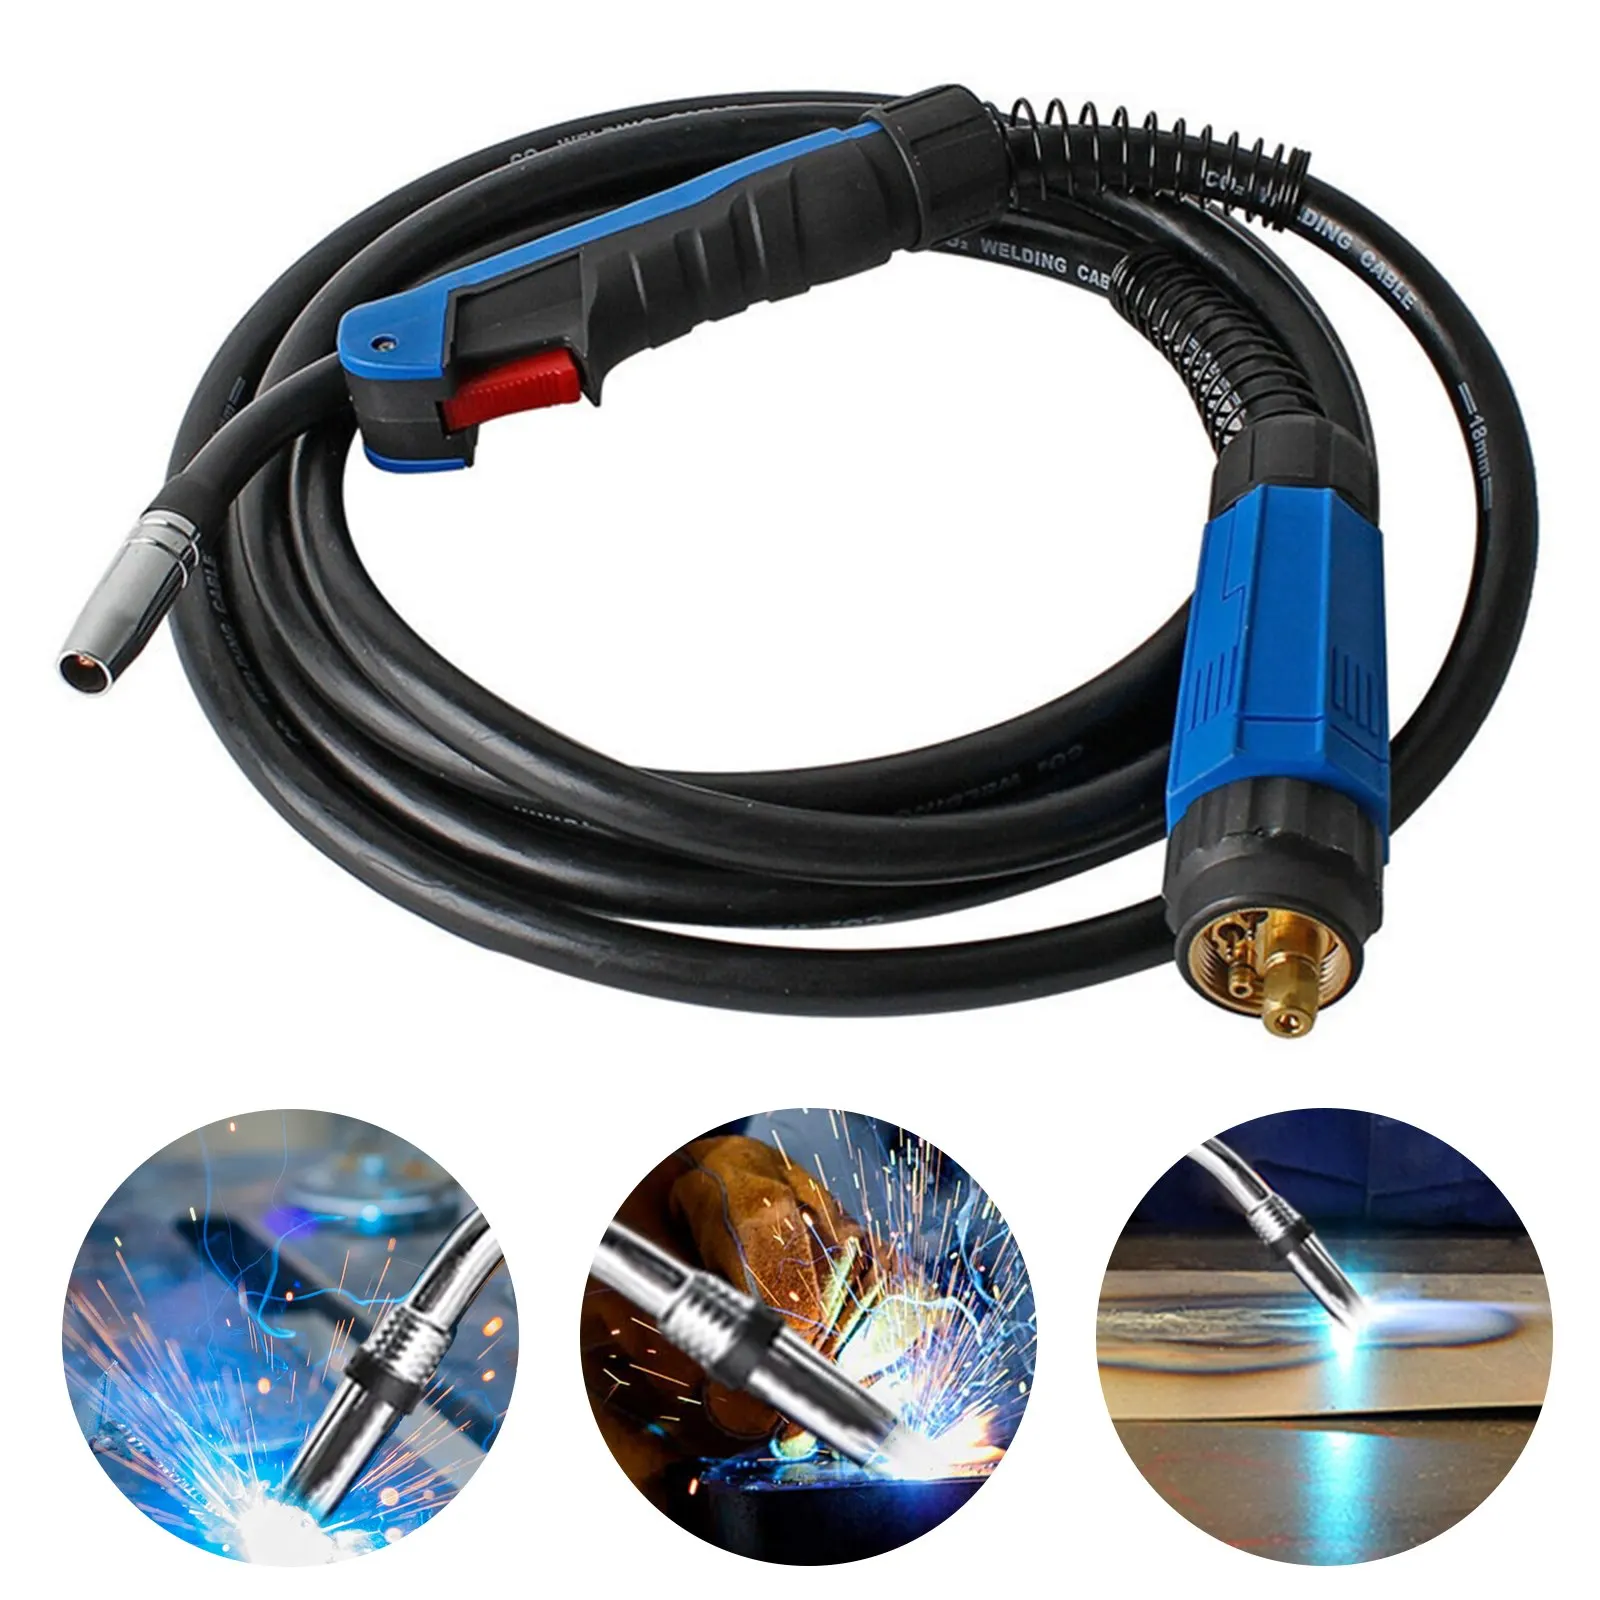 24KD Torch Professional 250A MIG Torch MAG Welding Torch Gun 5M Air-cooled Euro Connector for MIG MAG Welding Machine